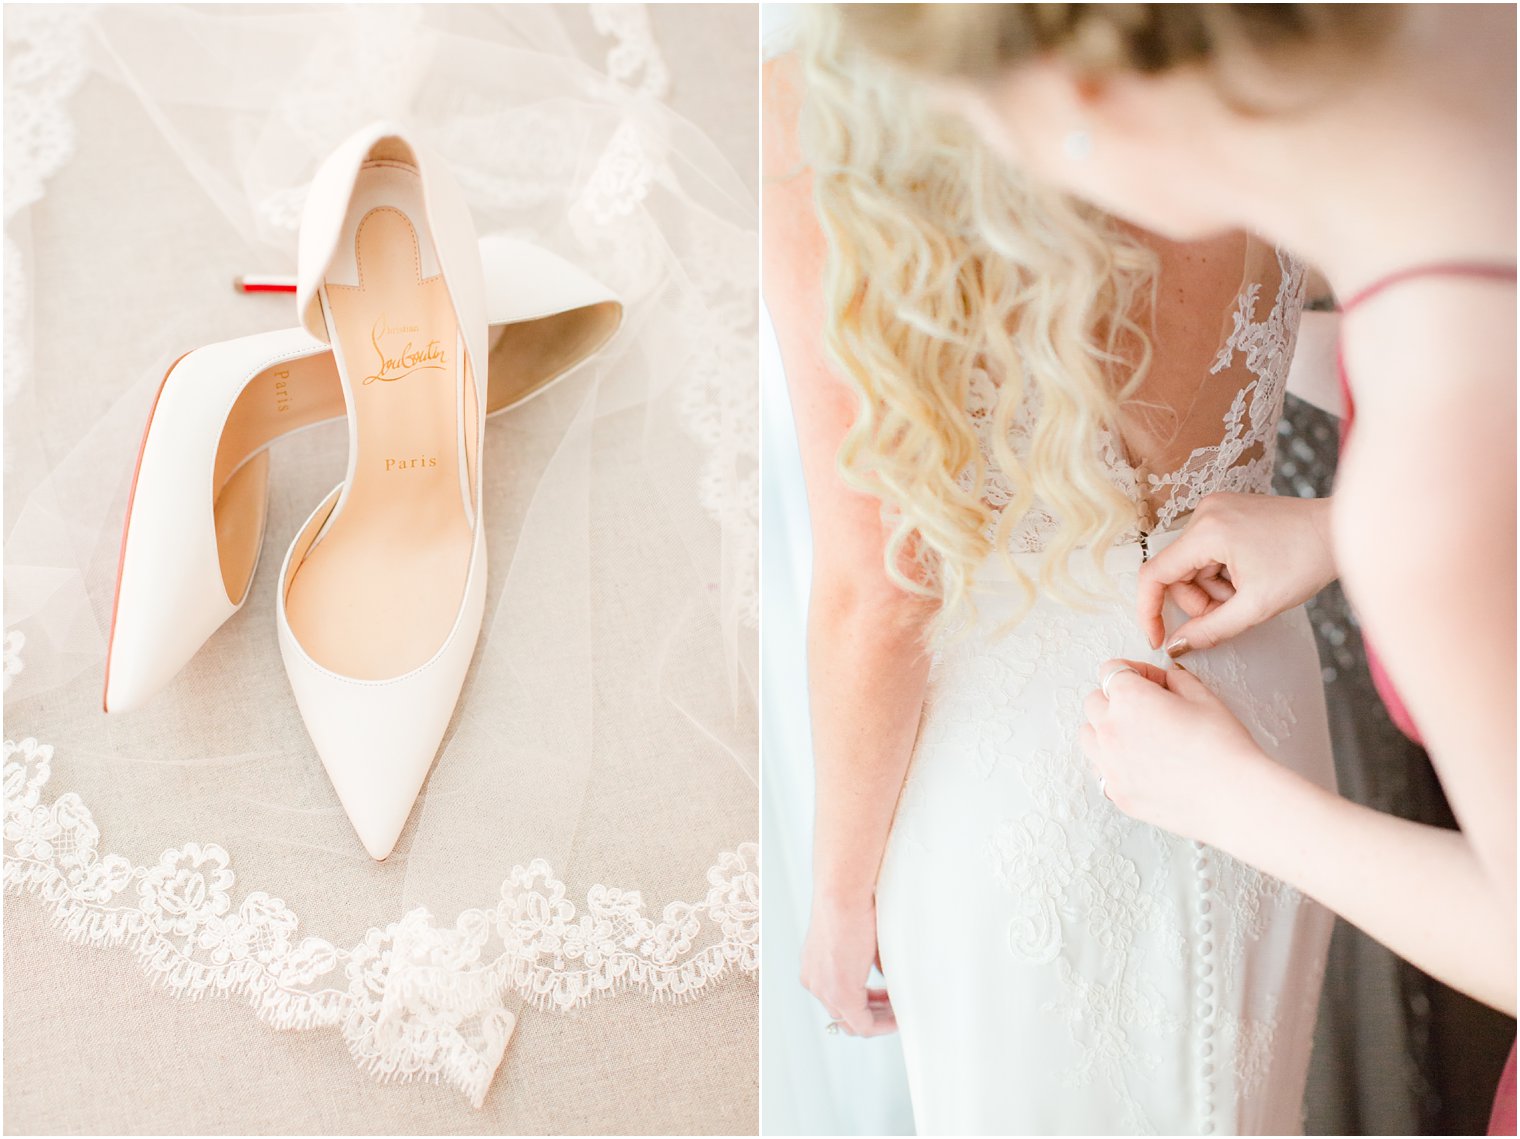 Bride's Louboutin shoes and maid of honor buttoning up dress